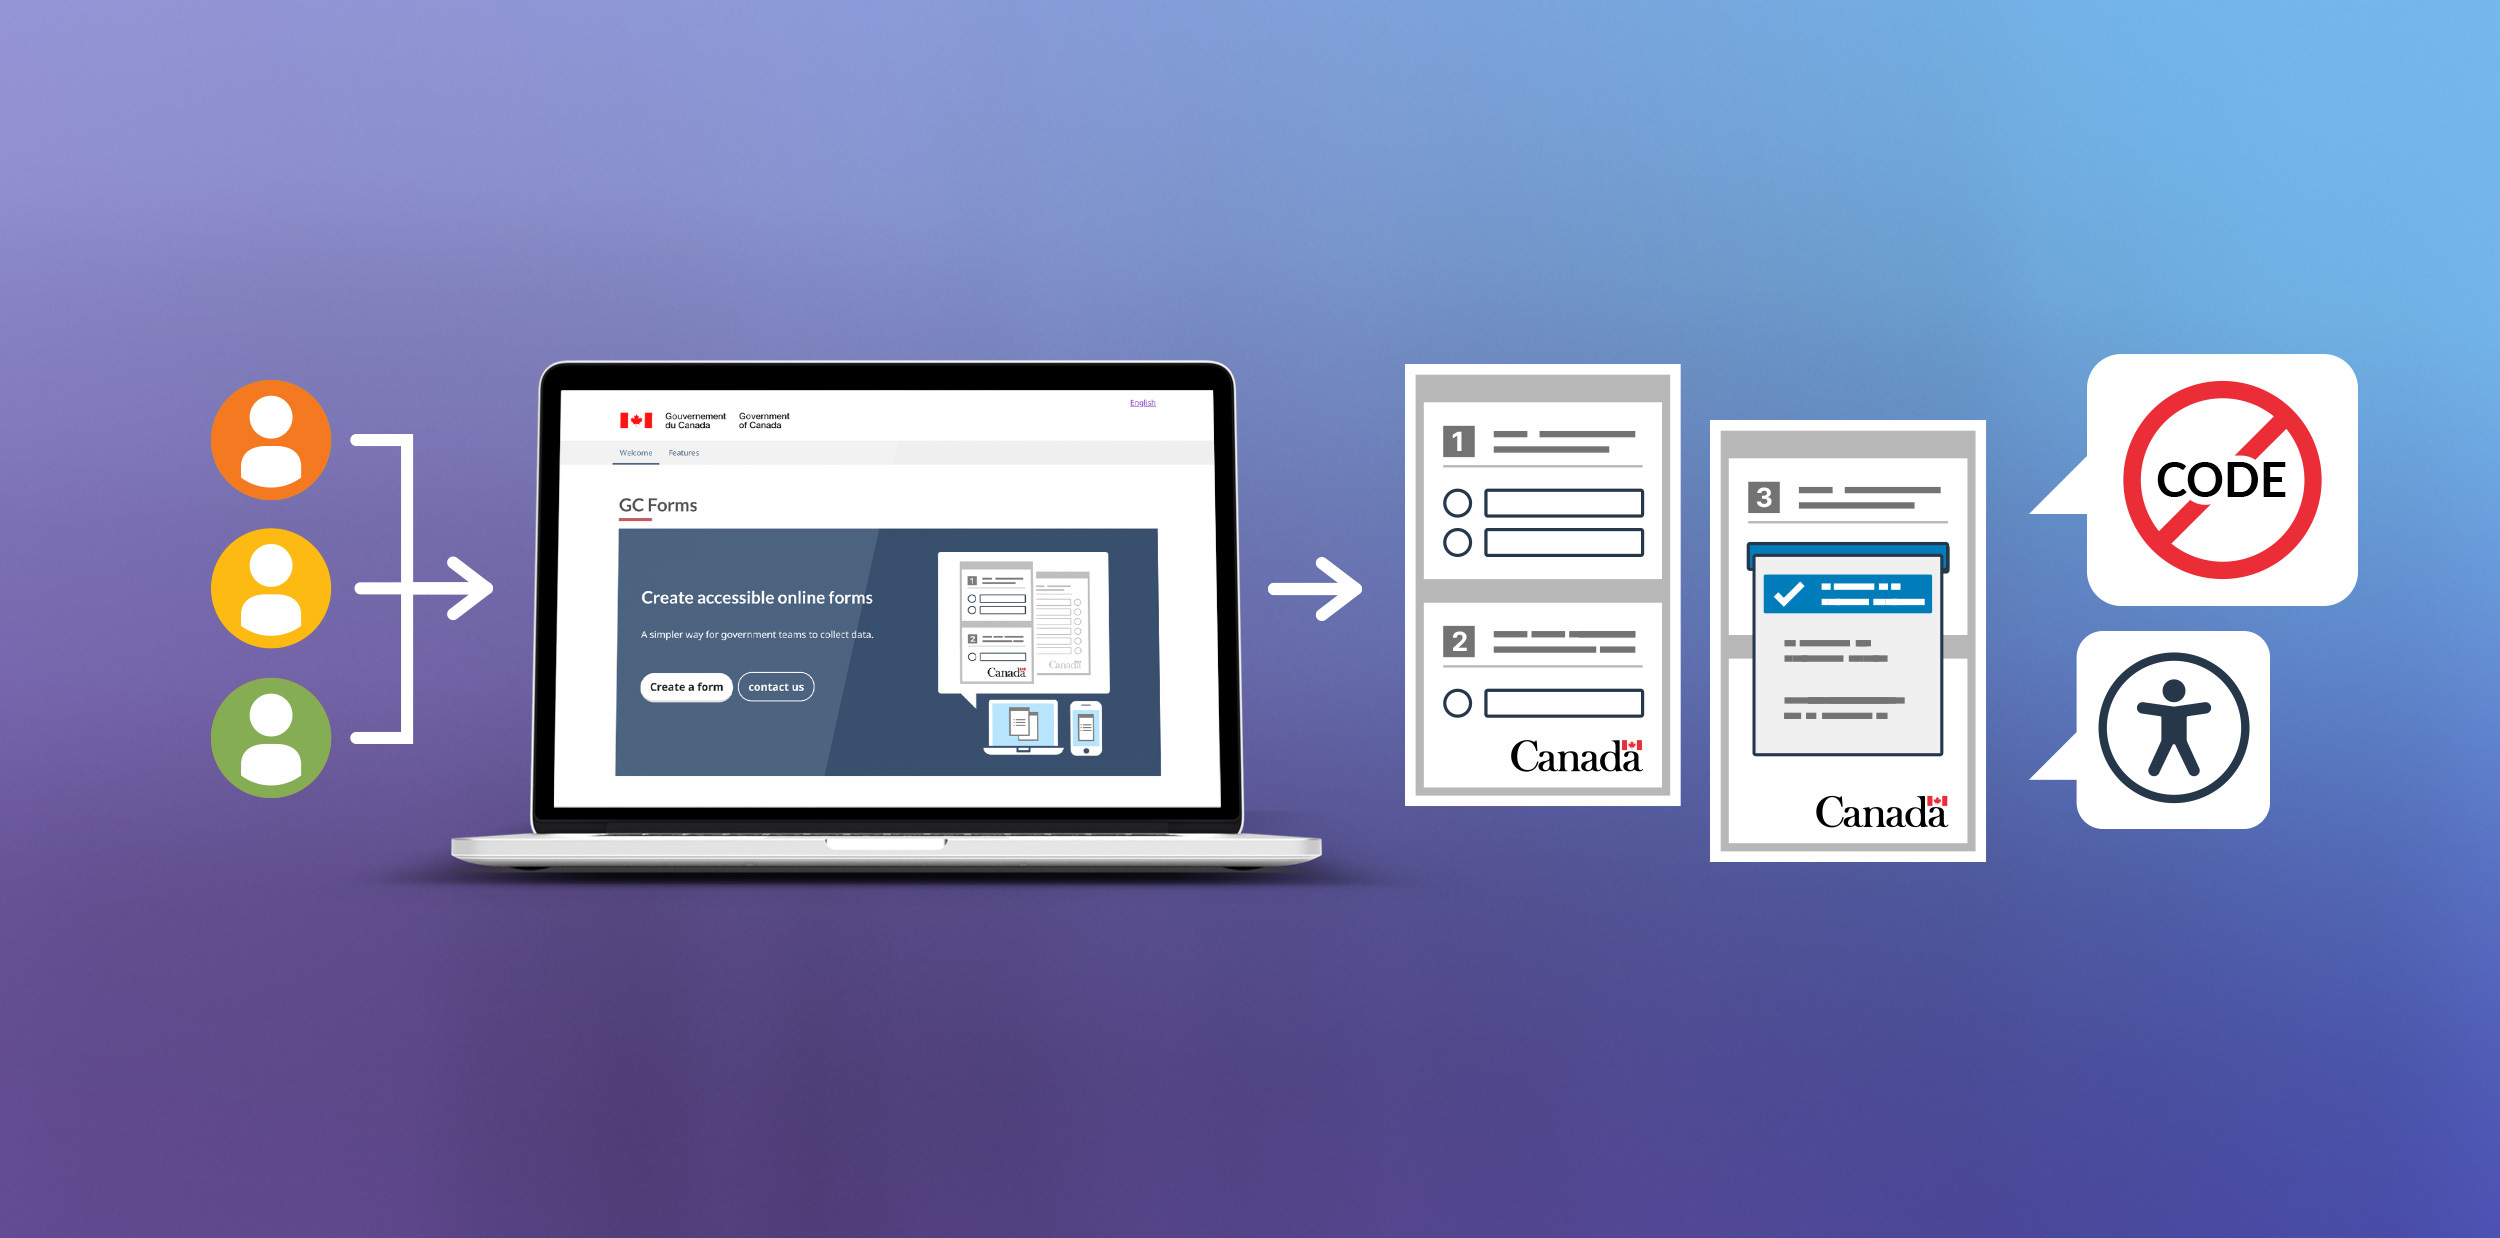 Public servants can use the GC Forms tool to build accessible online forms for Government of Canada services, no coding required.